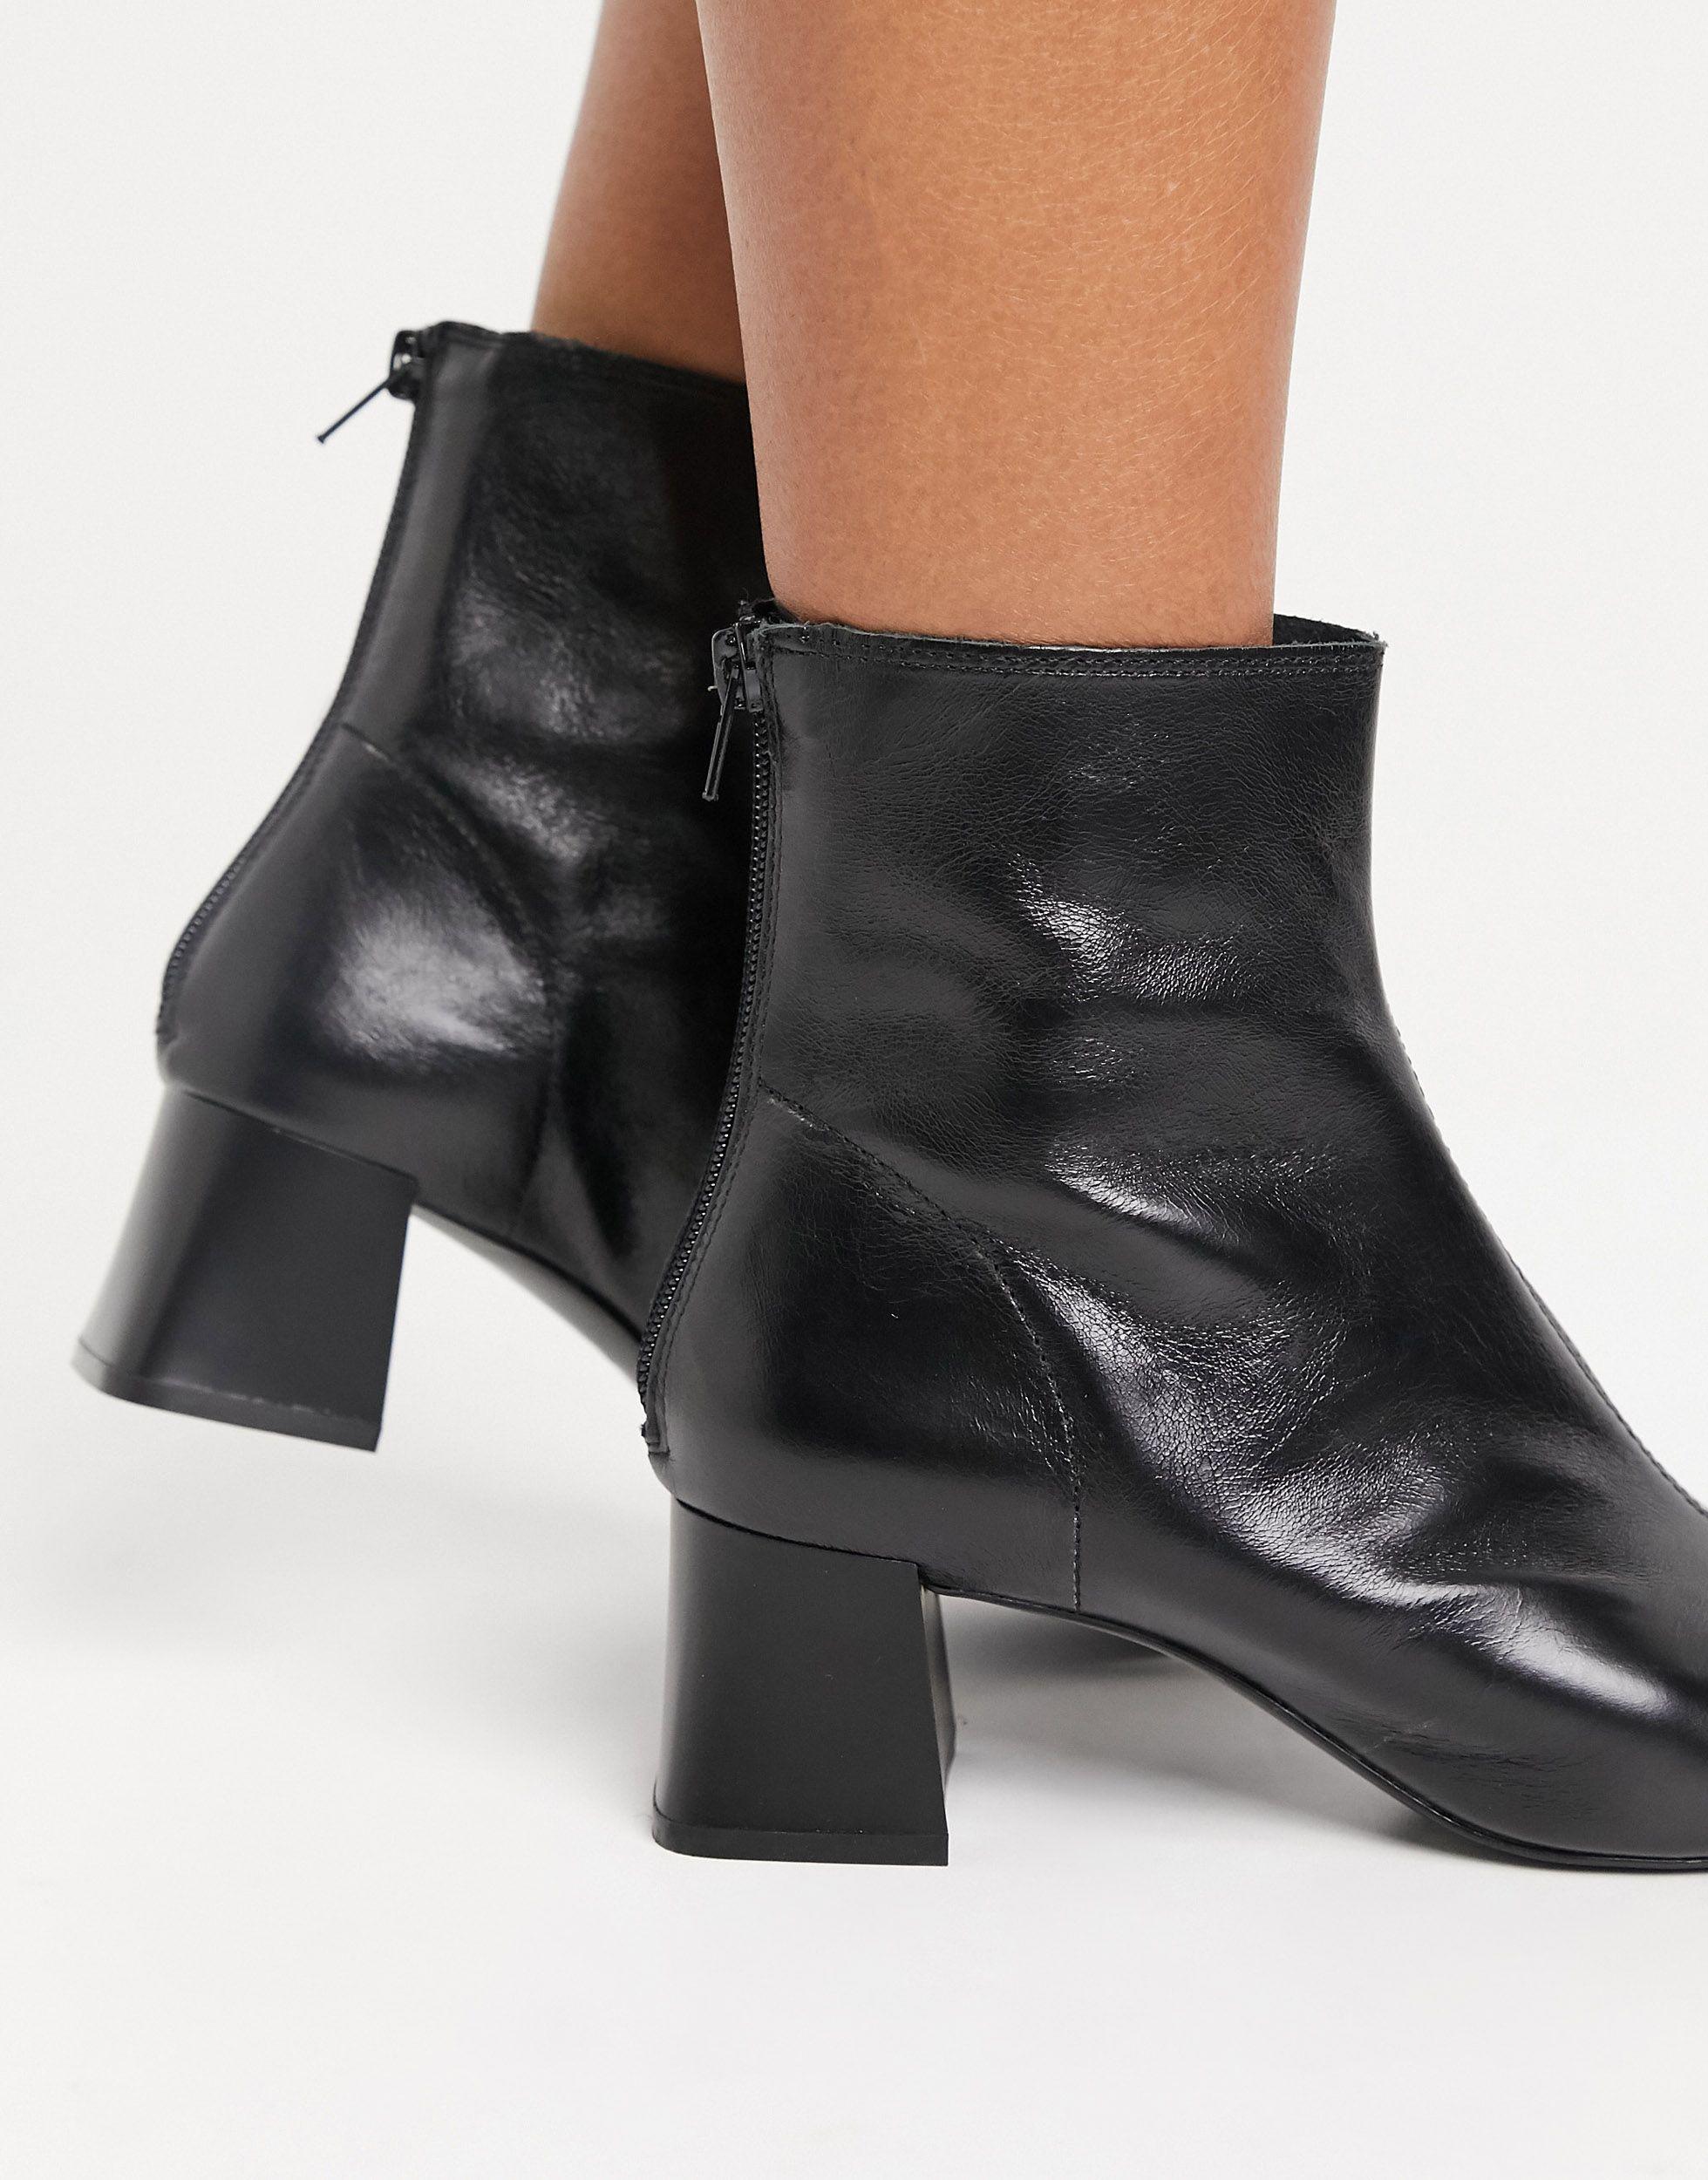 Mango Leather Mid Heel Boots in Black - Lyst